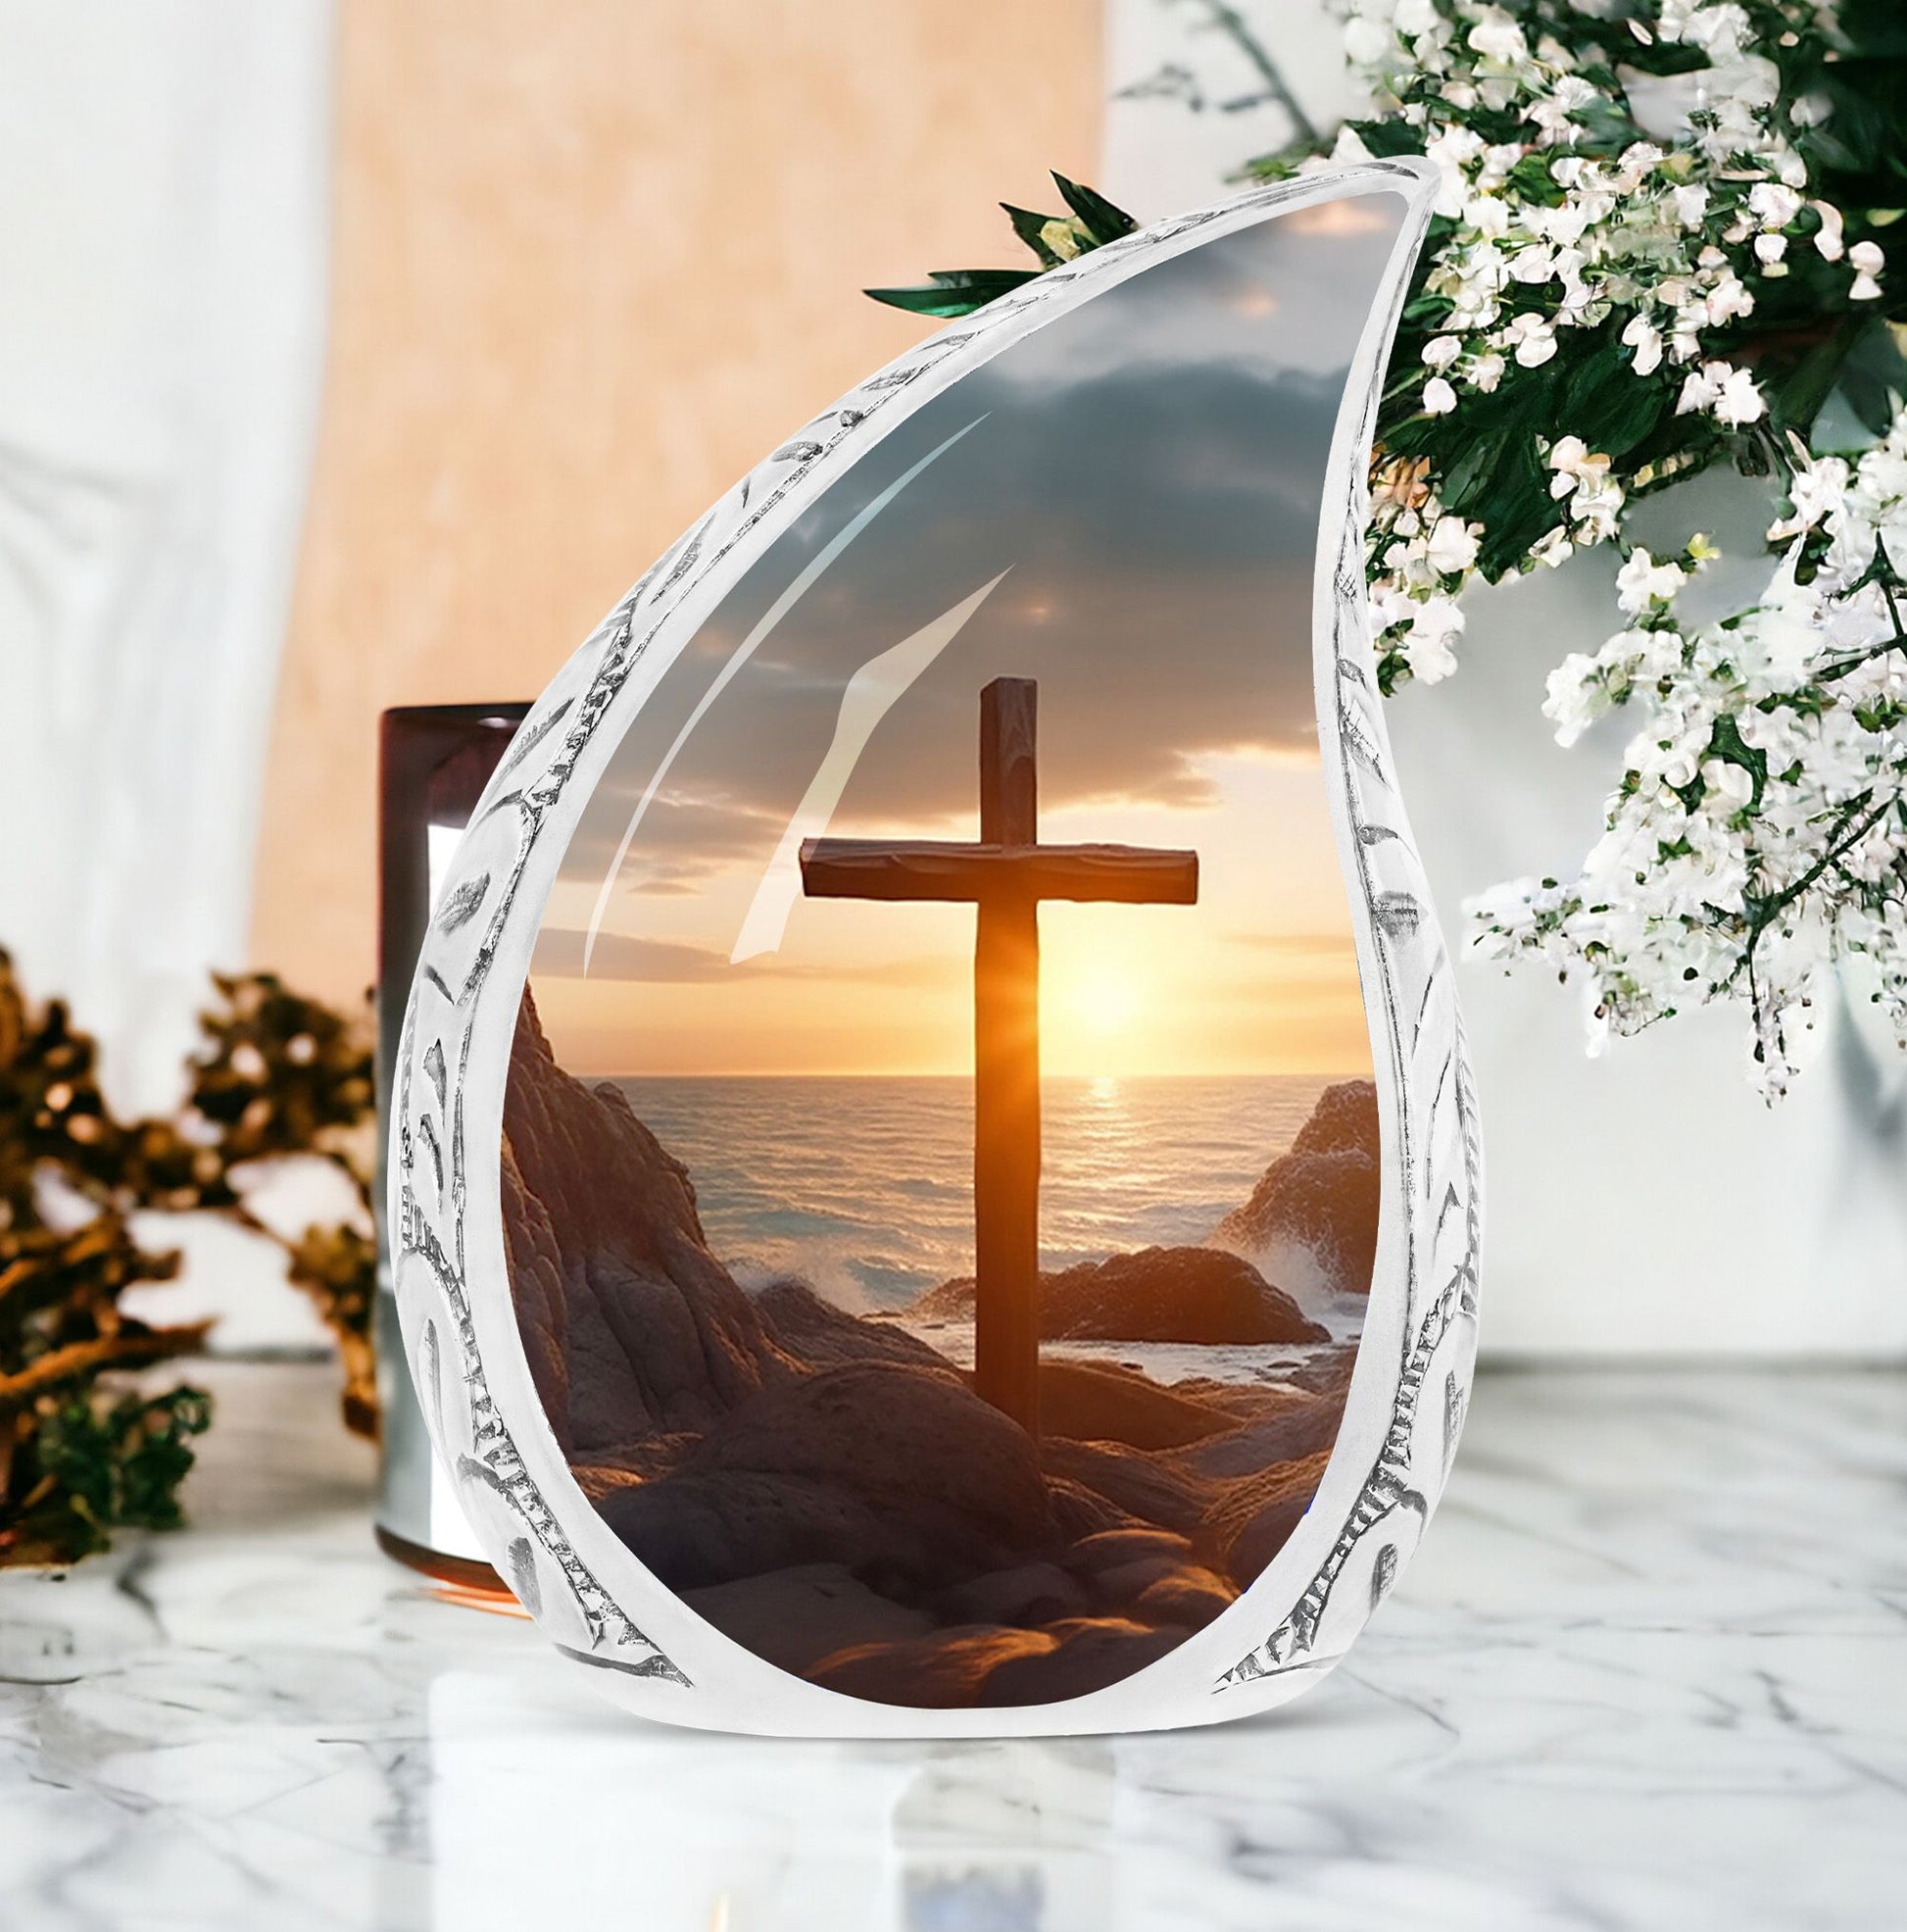 Large Christ themed urn with ocean background, suitable for adult male ashes, a distinctive piece for a funeral